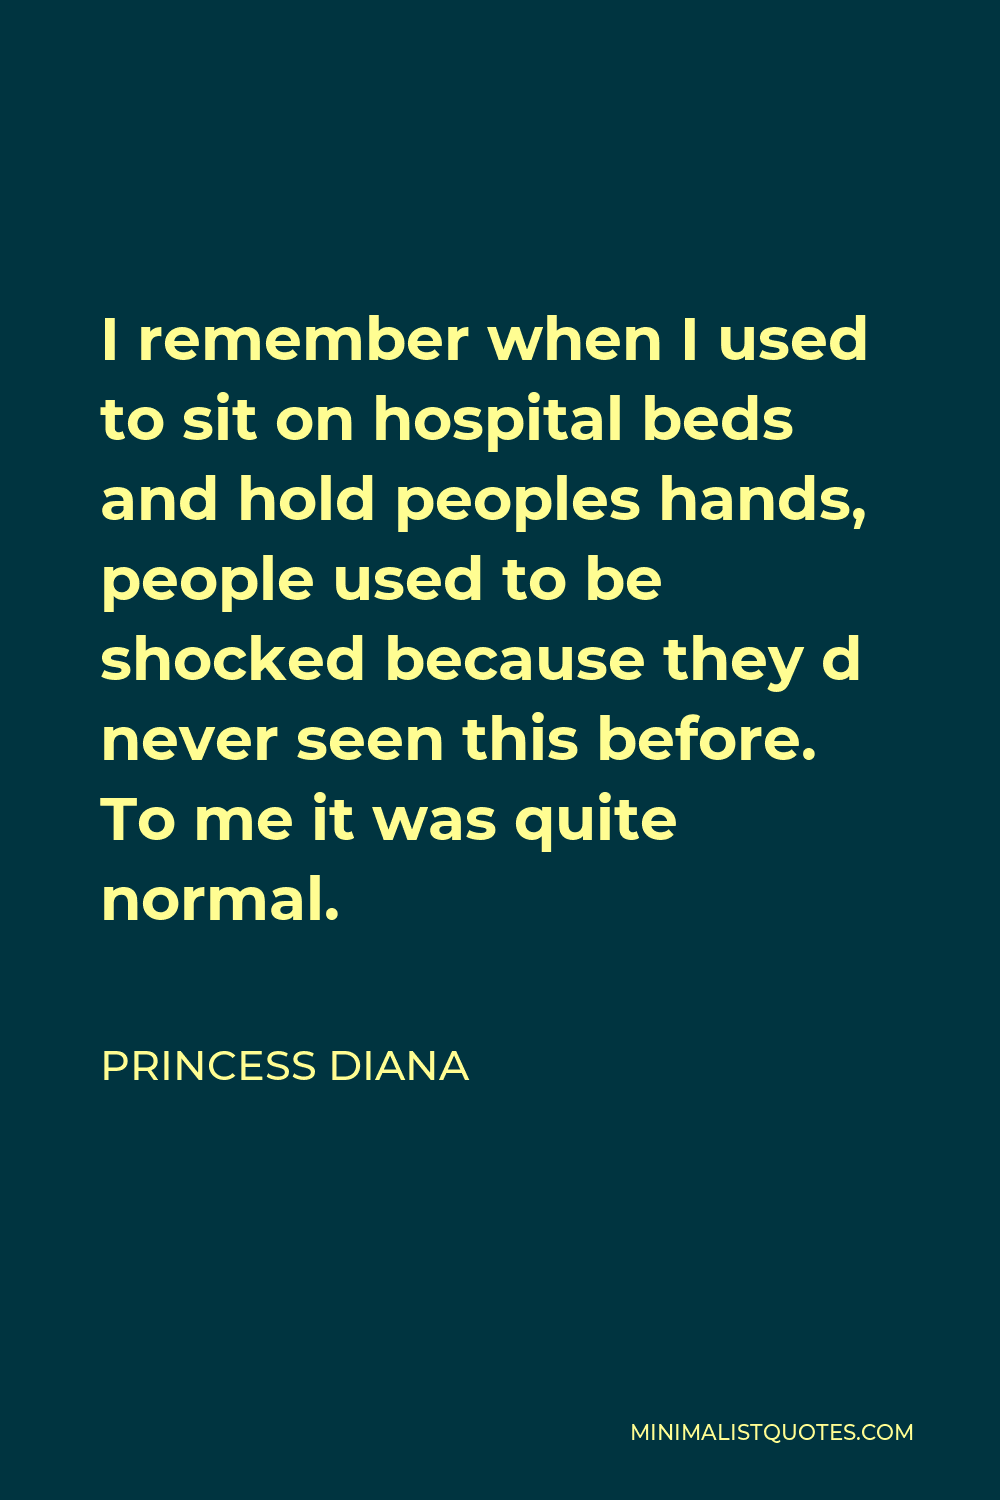 Princess Diana Quote - I remember when I used to sit on hospital beds and hold peoples hands, people used to be shocked because they d never seen this before. To me it was quite normal.